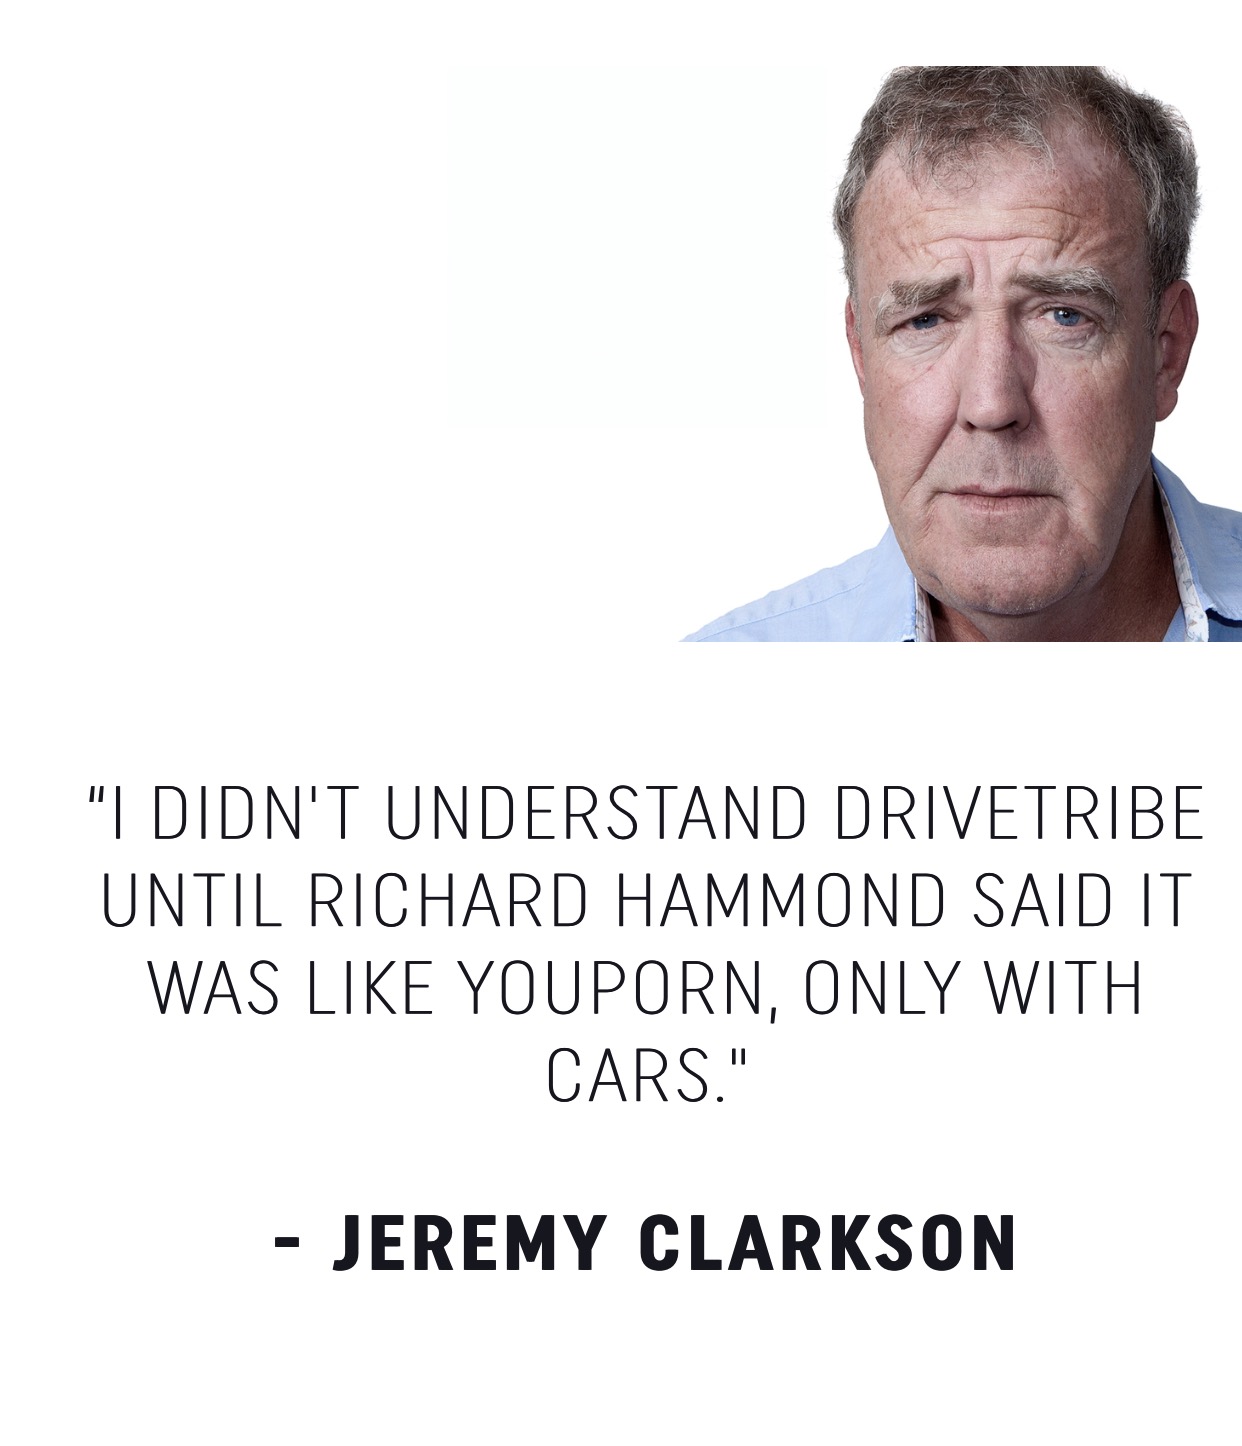 Jeremy Clarkson explaining he didn't understand drivetribe till Richard Hammond explained that it is like youporn, but with cars only